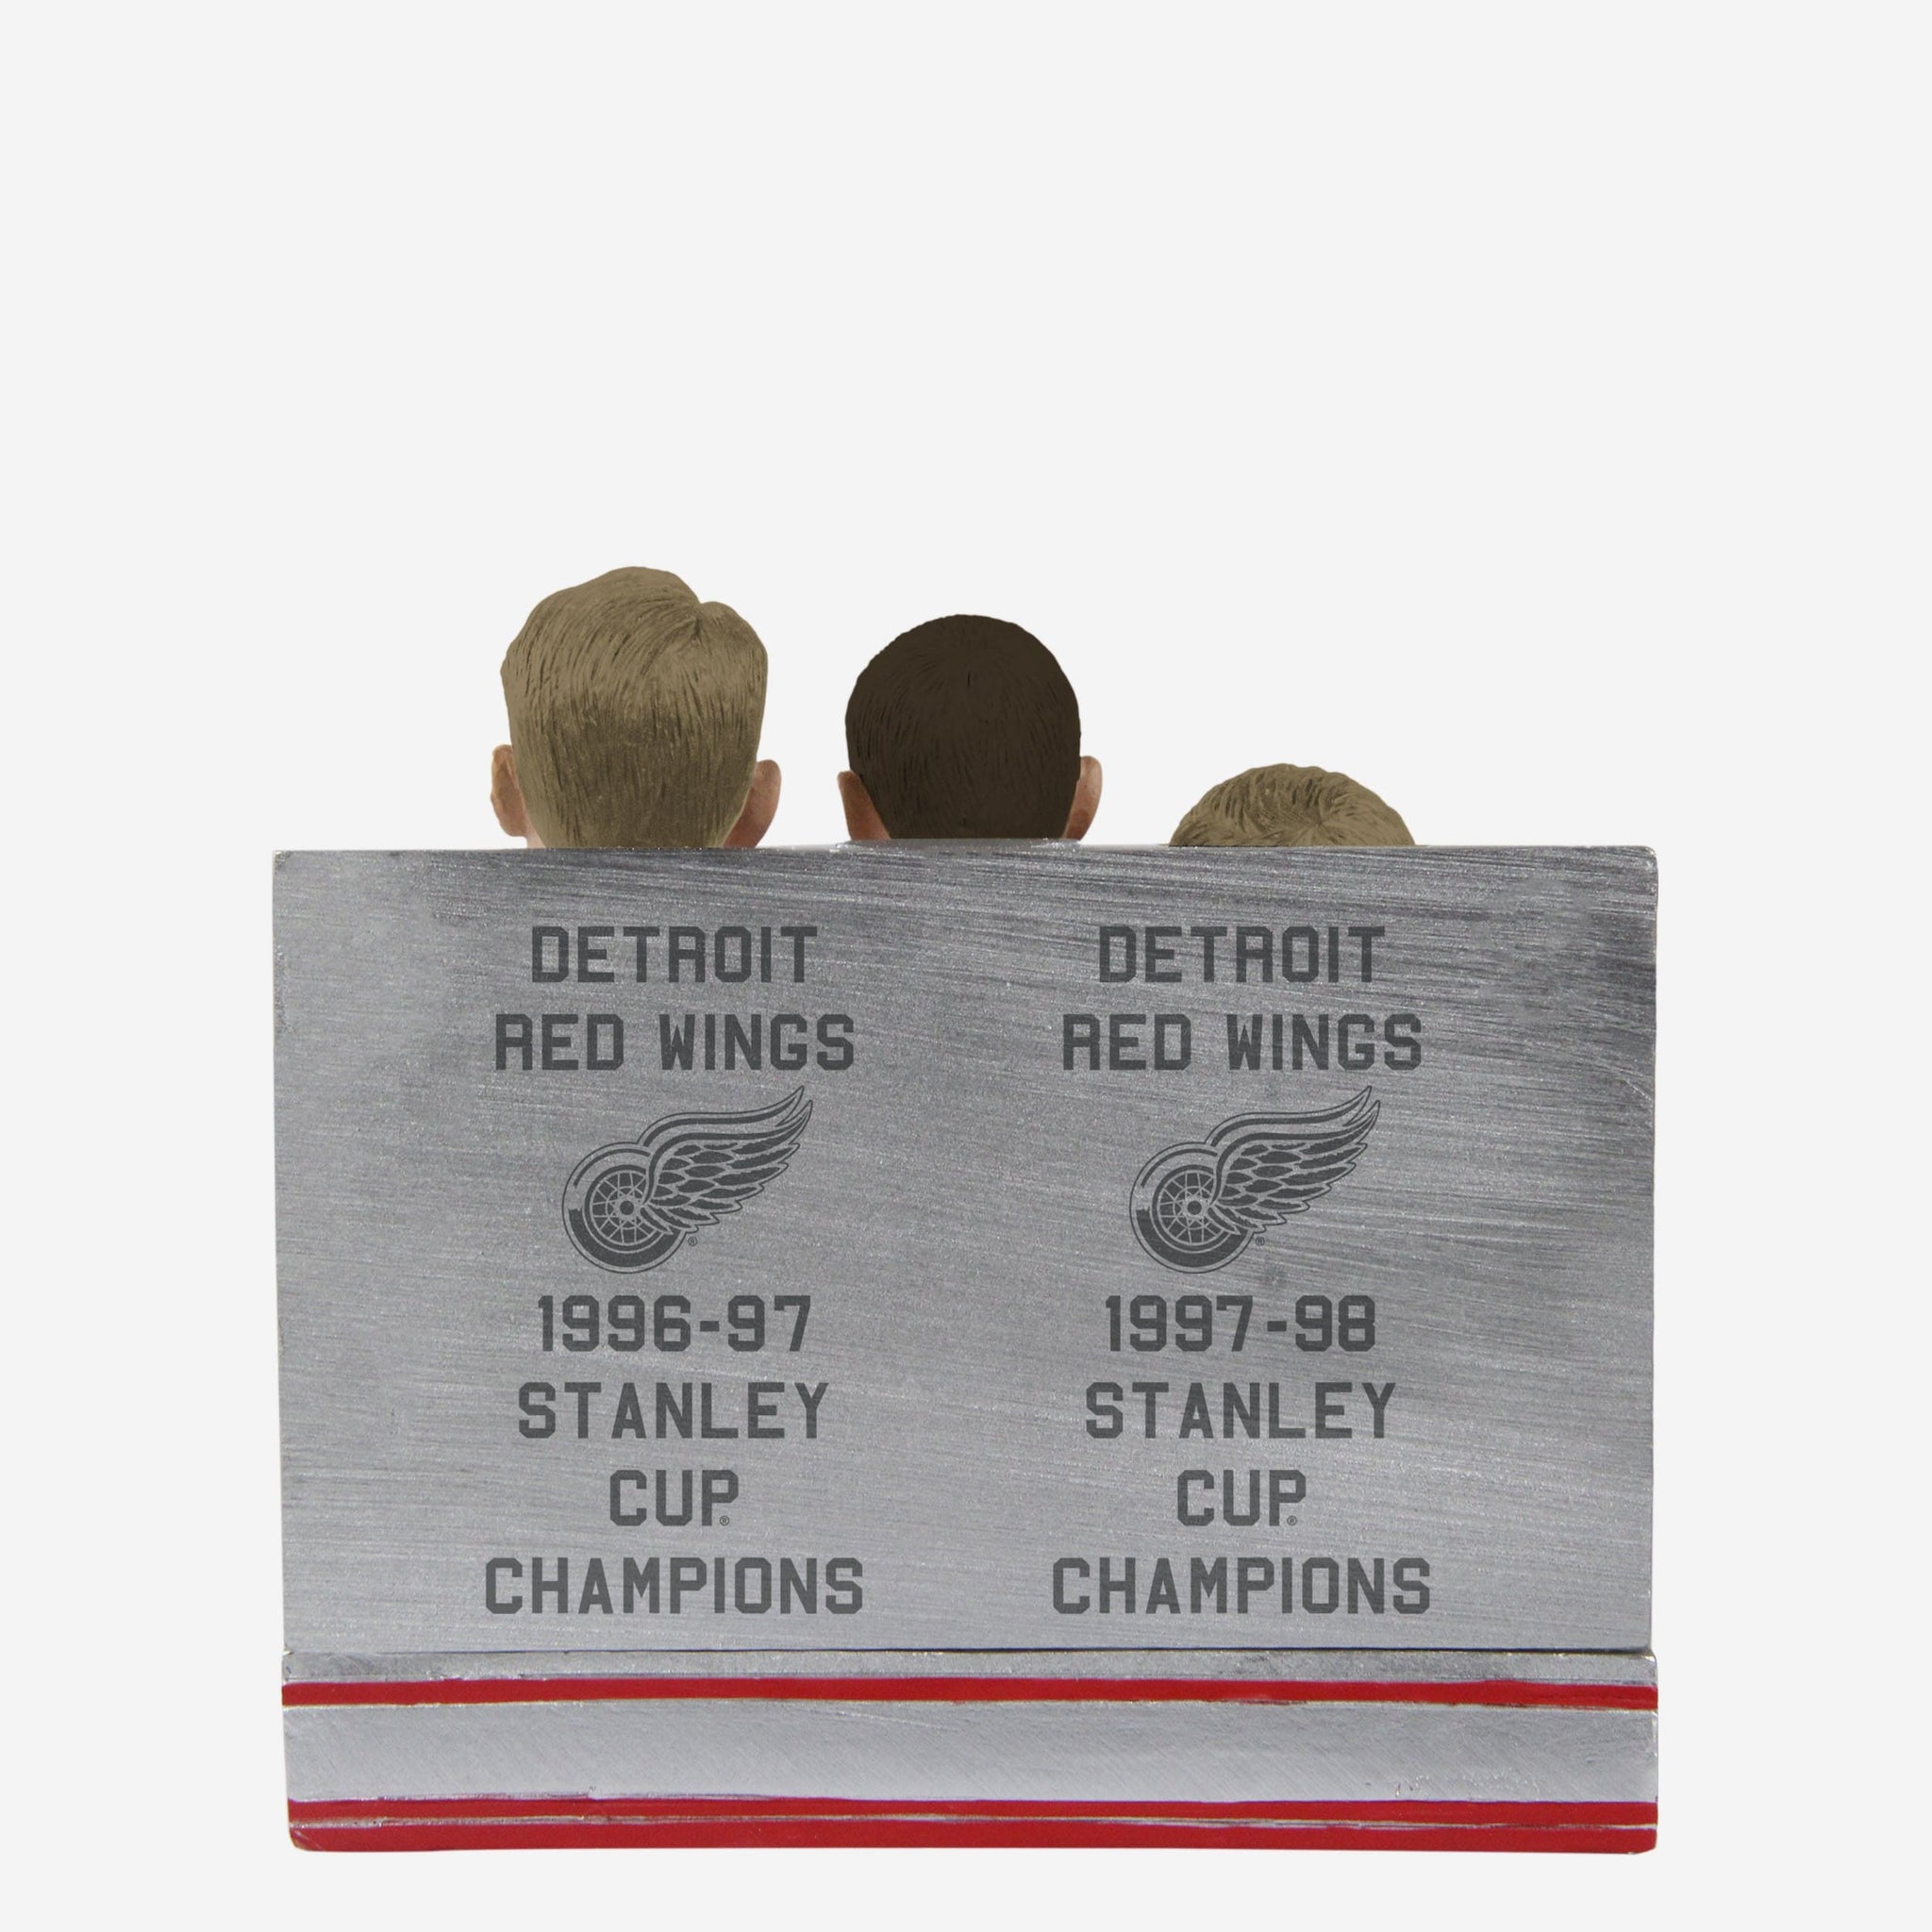 25th Anniversary of the Detroit Red Wings' Stanley Cup Hardcover